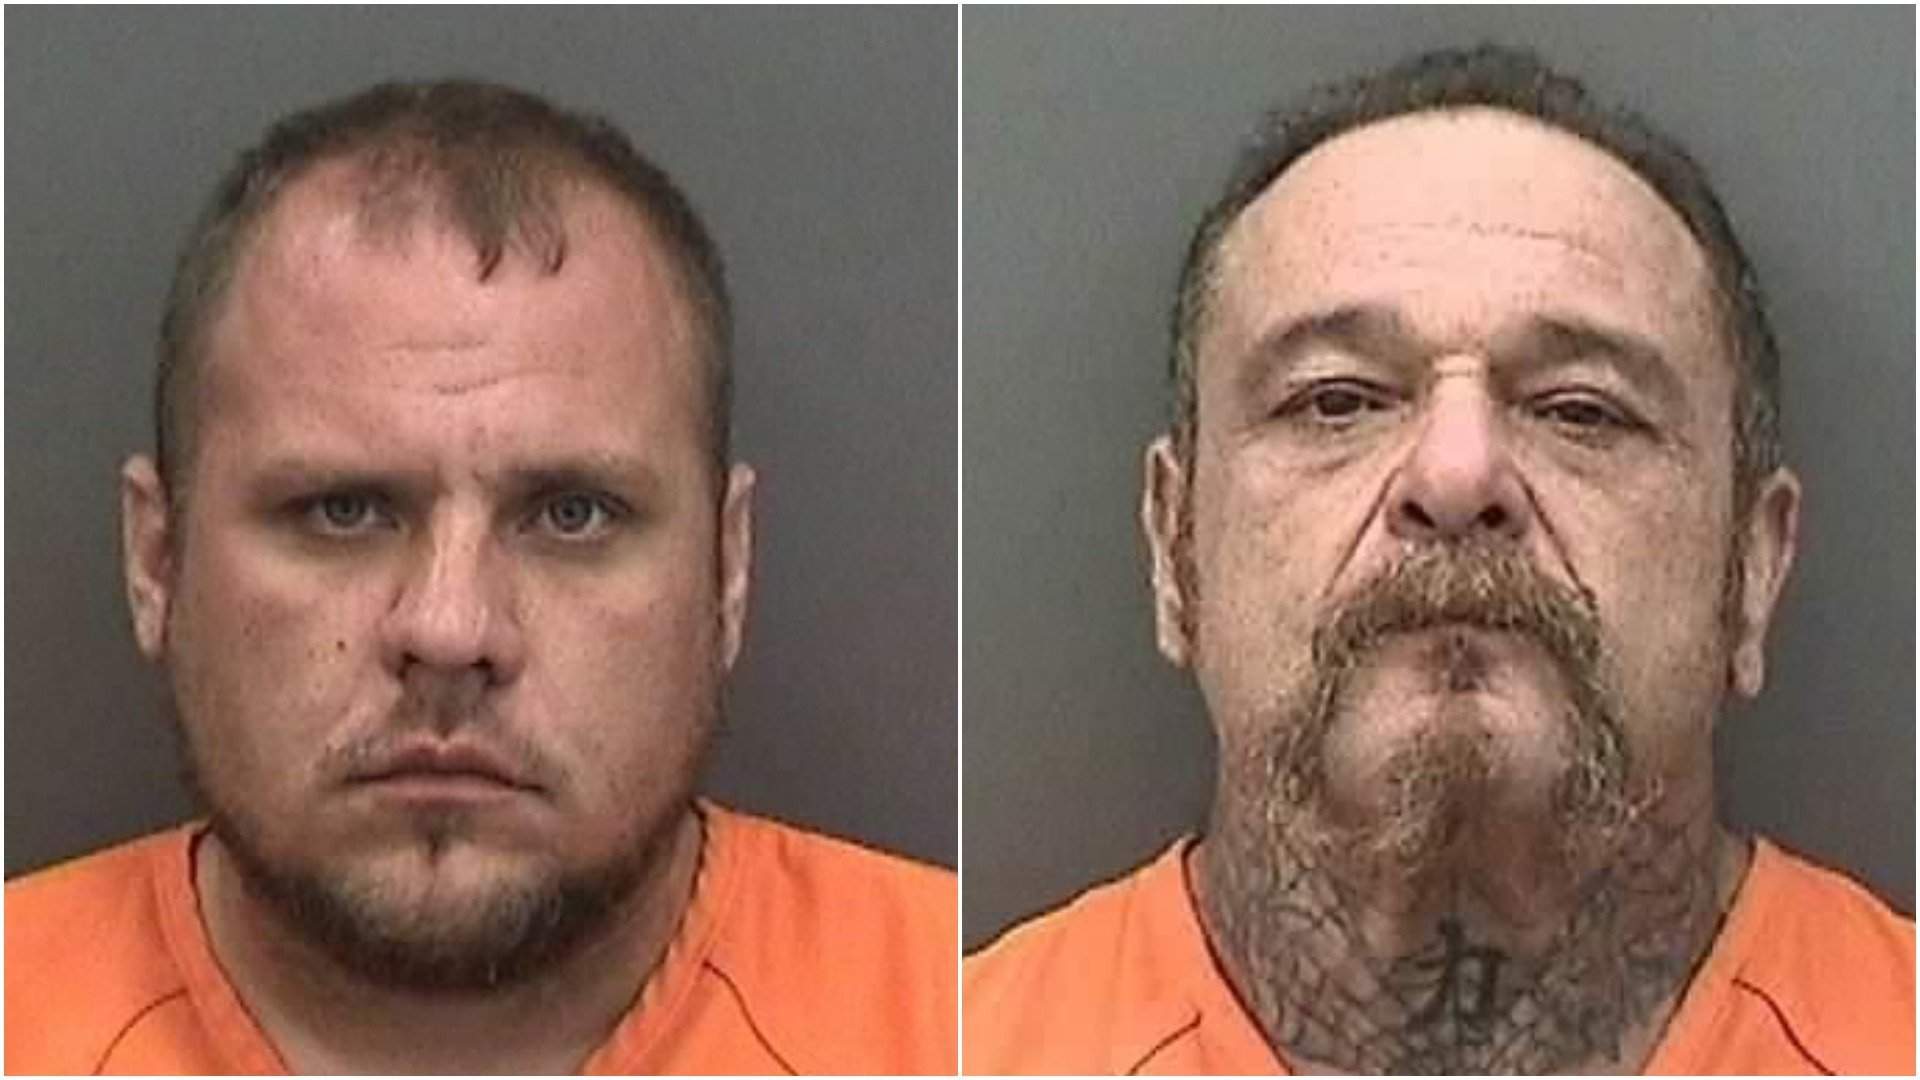 Christopher “Durty” Cosimano, 31, left, and Michael “Pumpkin” Mencher, 52, are both alleged members of the “Killsborough” chapter of the 69’ers Motorcycle Club. Both went on trial in federal court this week in the 2017 assassination of a gang rival: Paul Anderson, 44, president of the rival Cross Bayou chapter of the Outlaws Motorcycle Club. [Pasco County Sheriff’s Office]